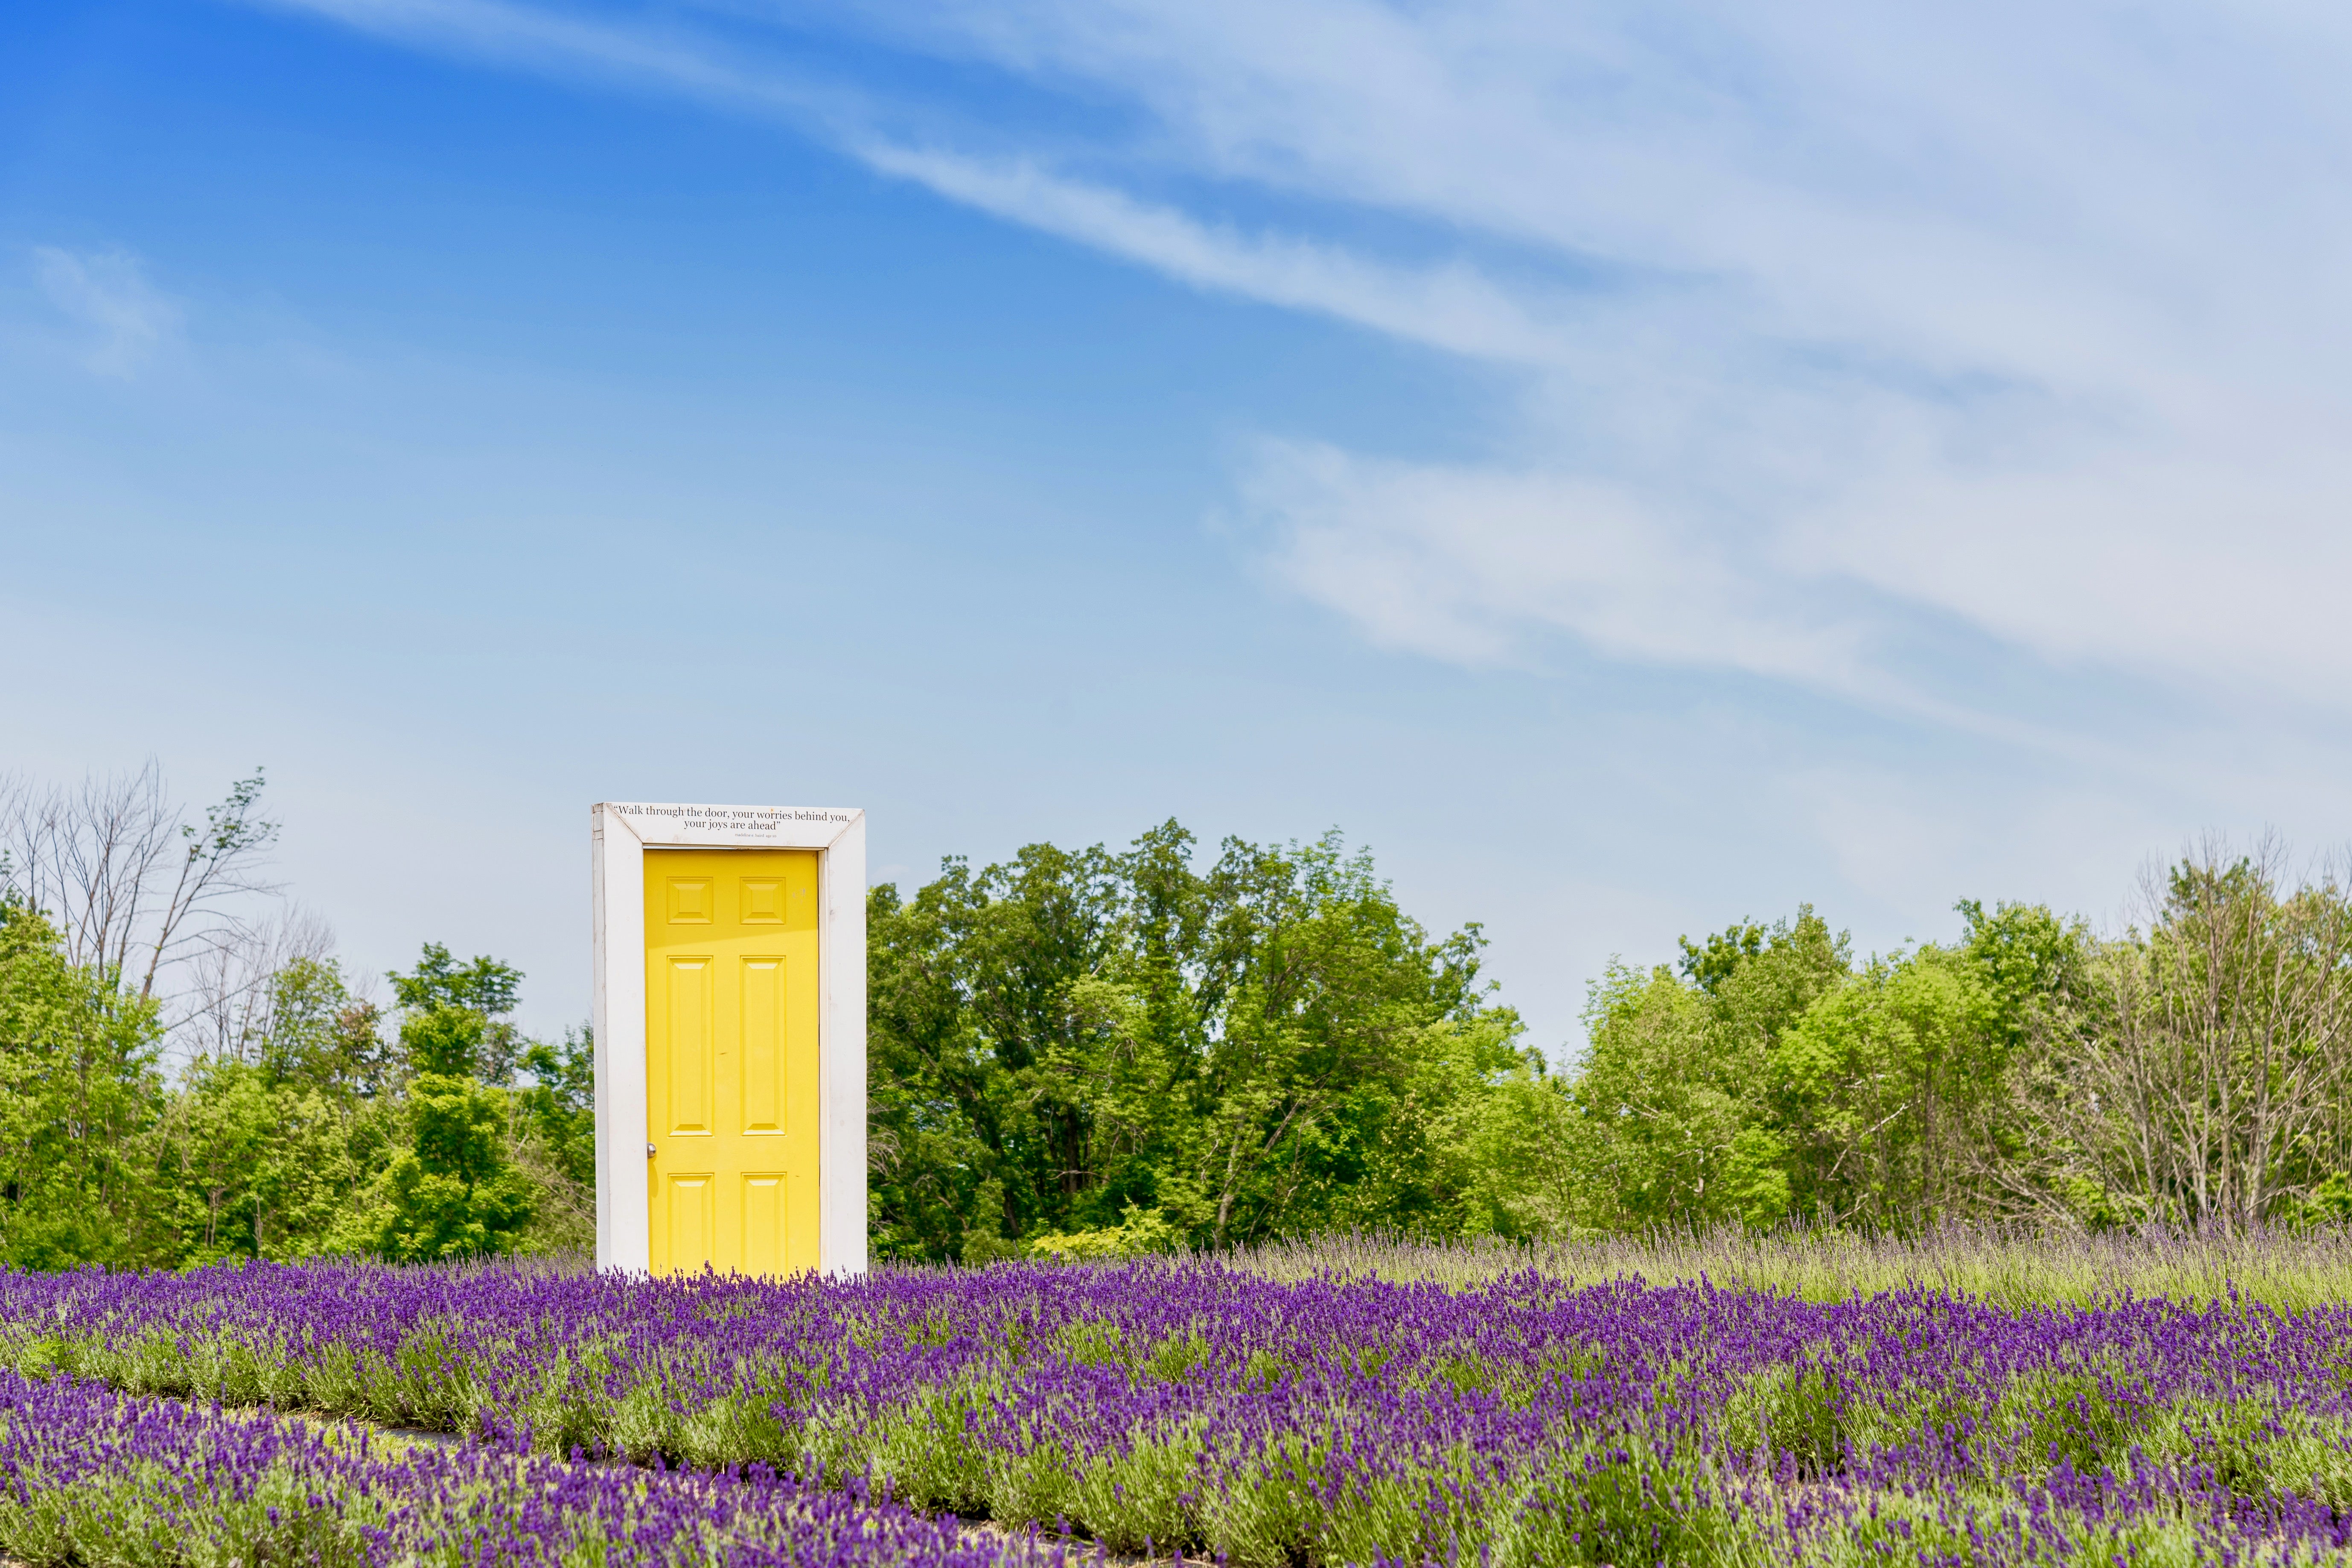 The Instagram famous yellow door in the heart of the lavender fields at Terre Bleu.